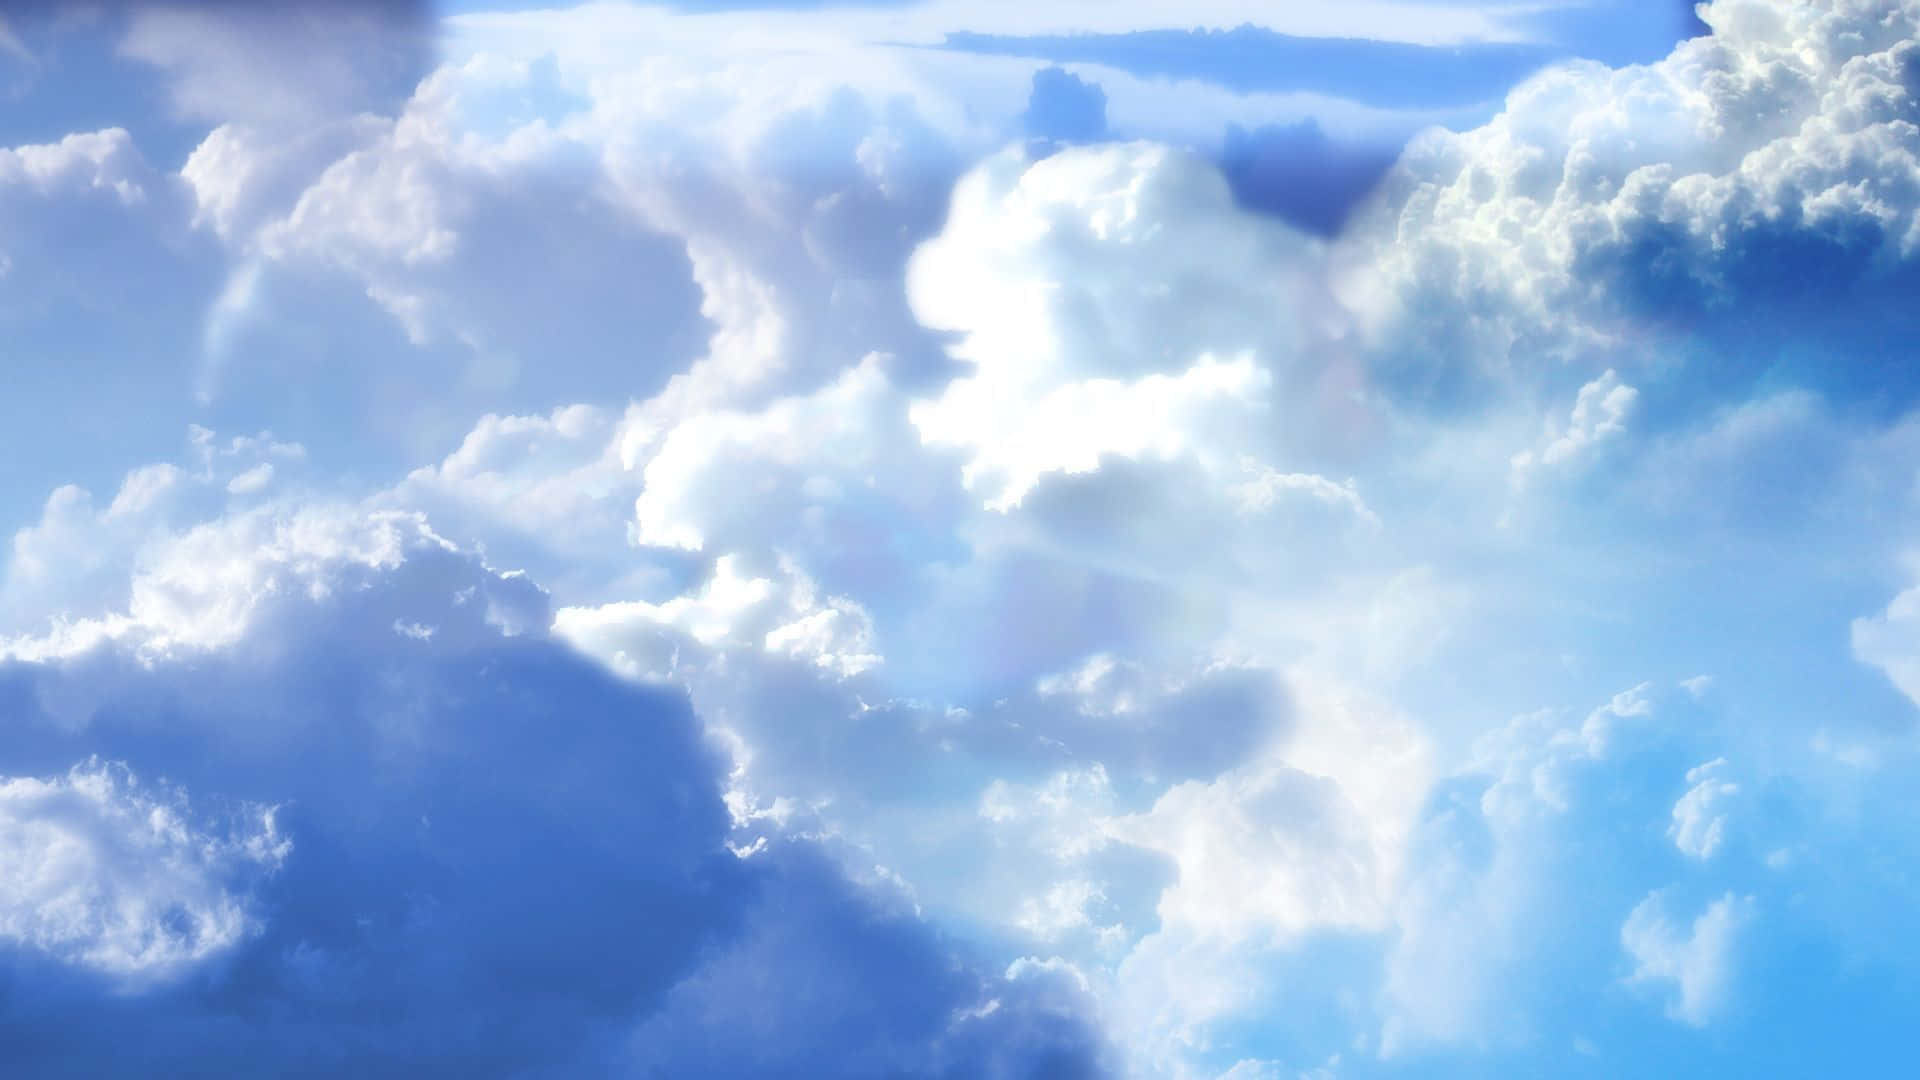 "Heavenly view of a tranquil sky and floating clouds"